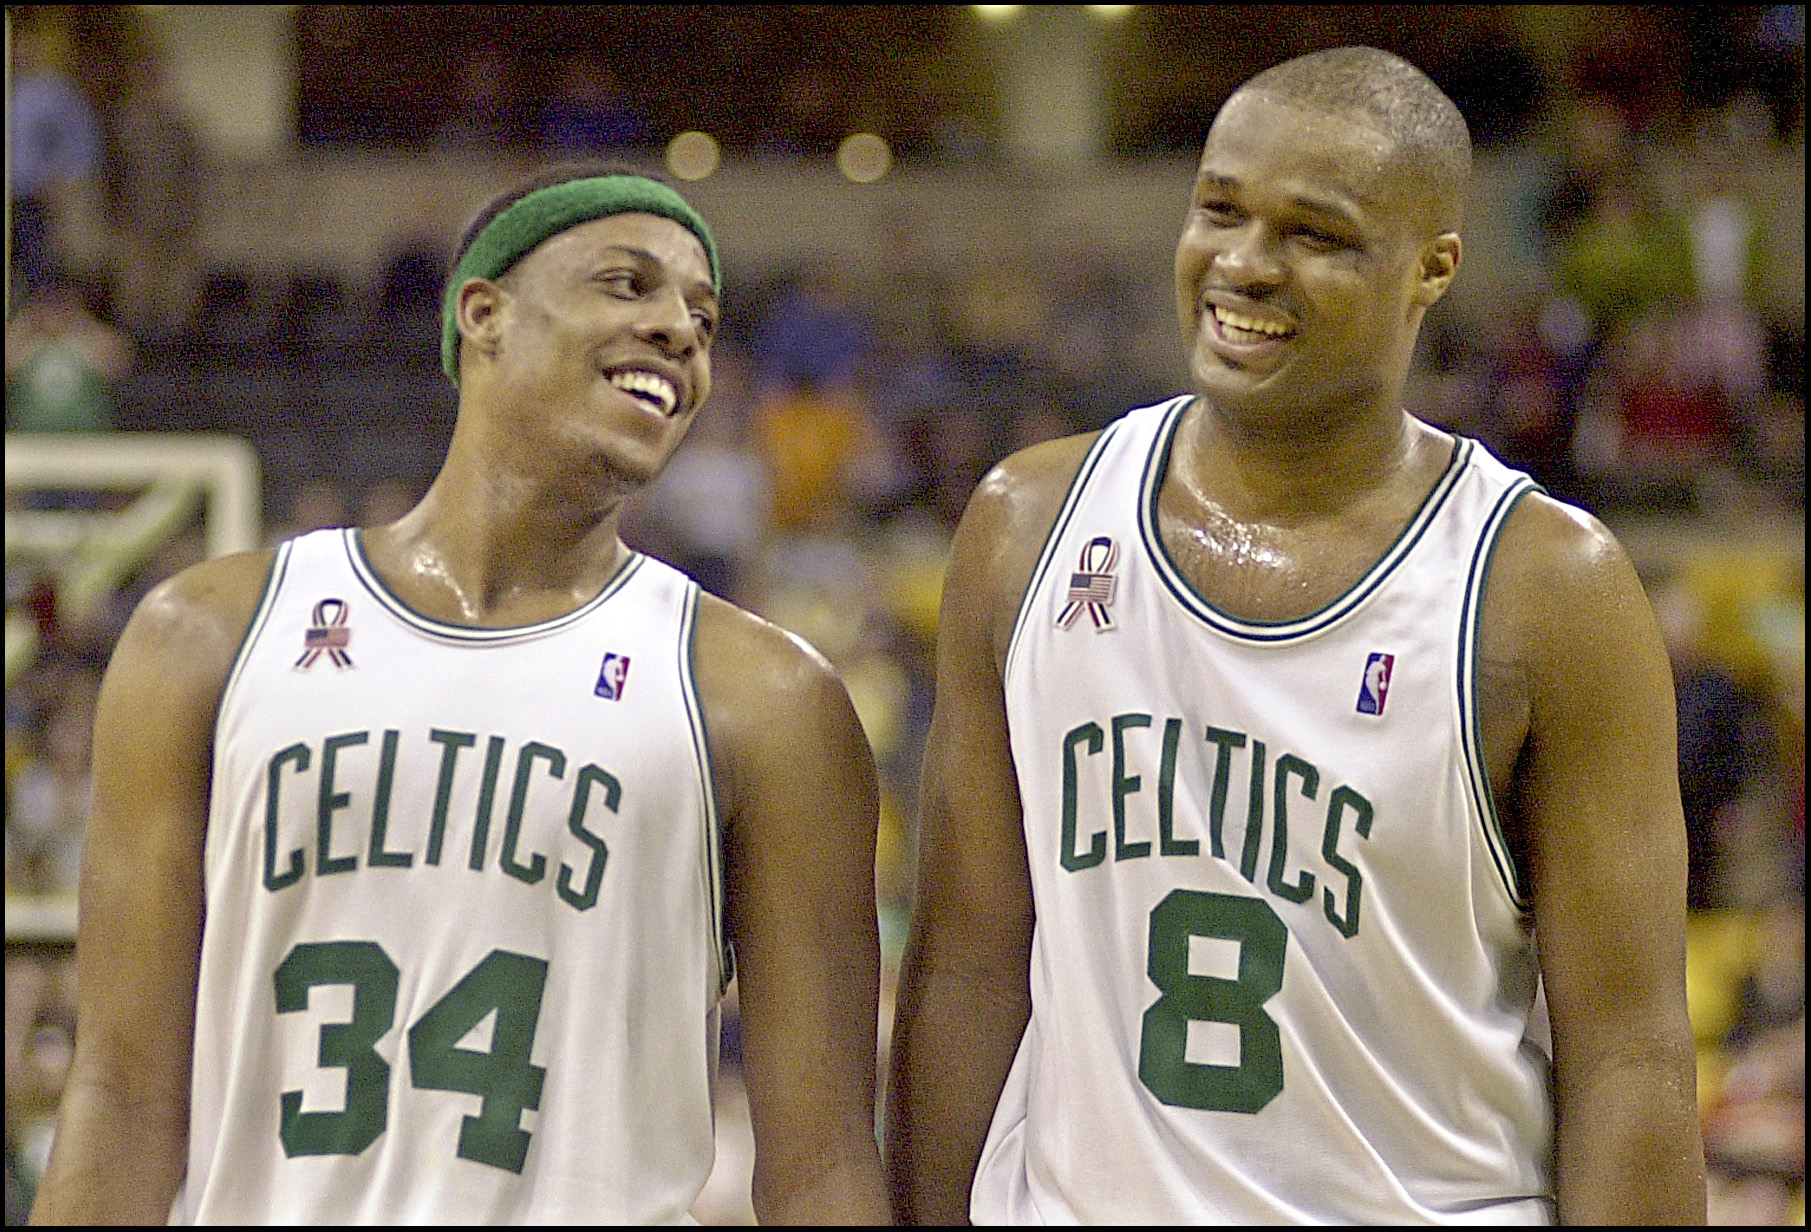 Former Celtics teammates Paul Pierce and Antonio Walker smile during a game in 2002